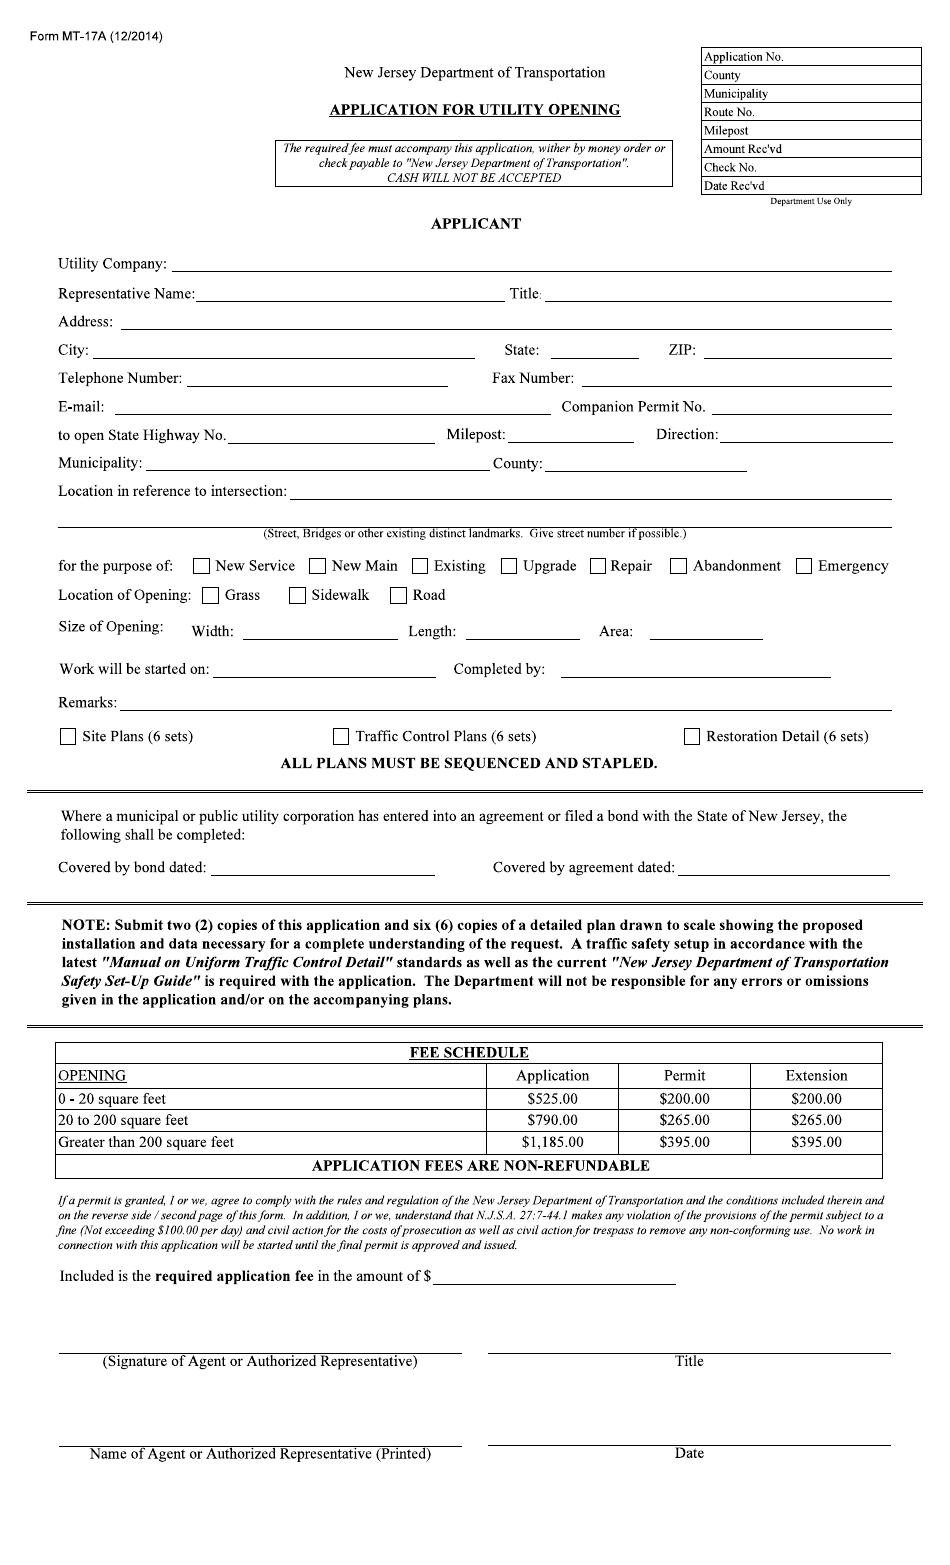 Form MT-17A Application for Utility Opening - New Jersey, Page 1